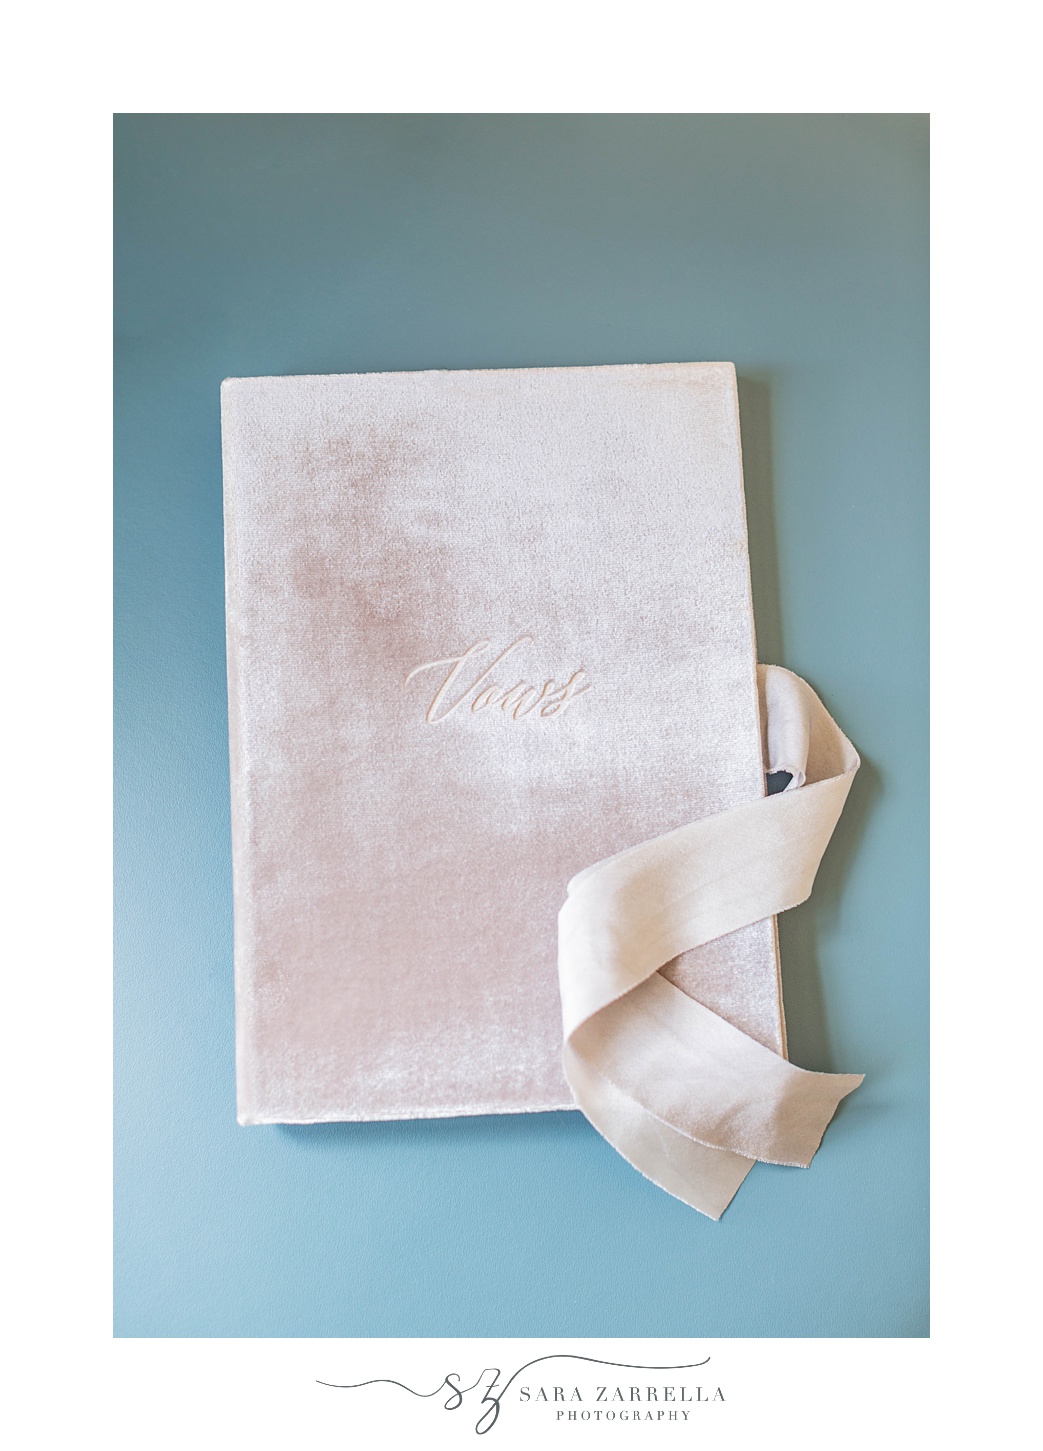 vow booklet photographed on blue styling mat by Rhode Island wedding photographer